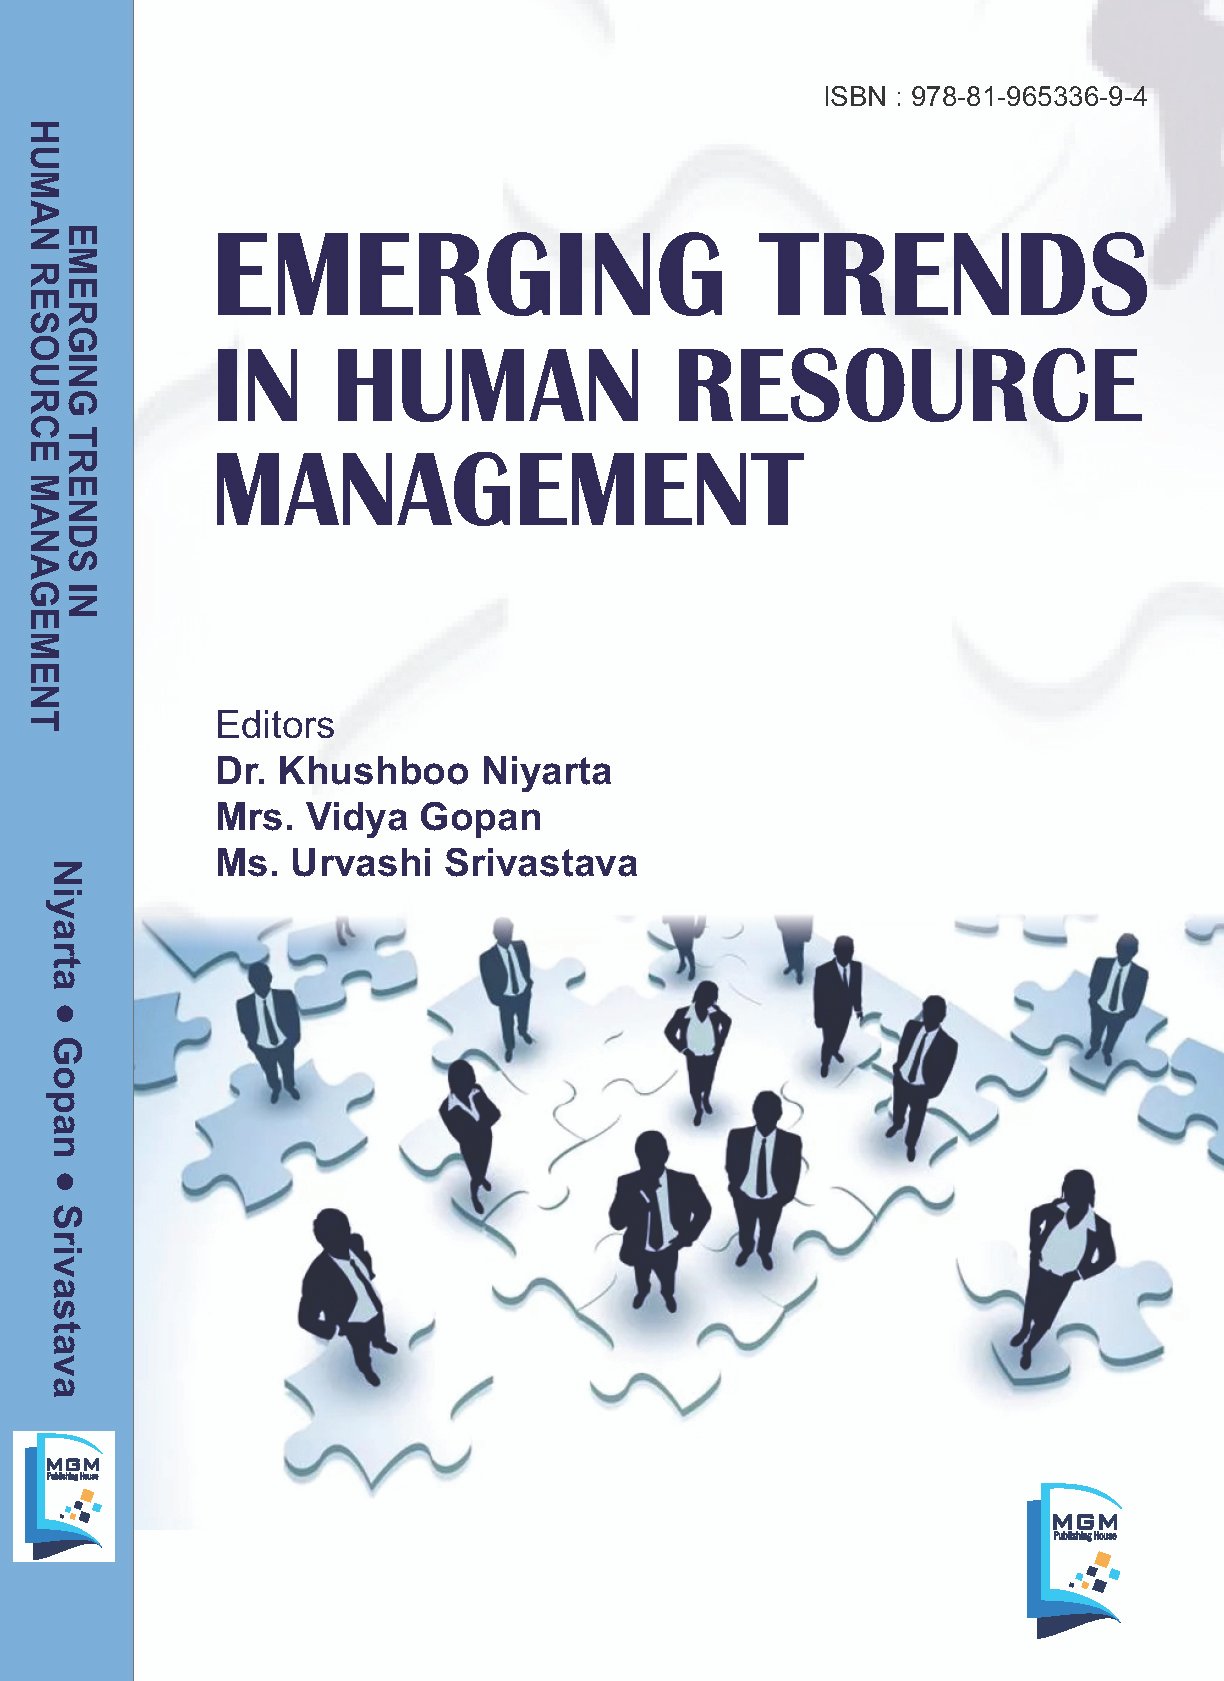 EMERGING TRENDS IN HUMAN RESOURCE MANAGEMENT